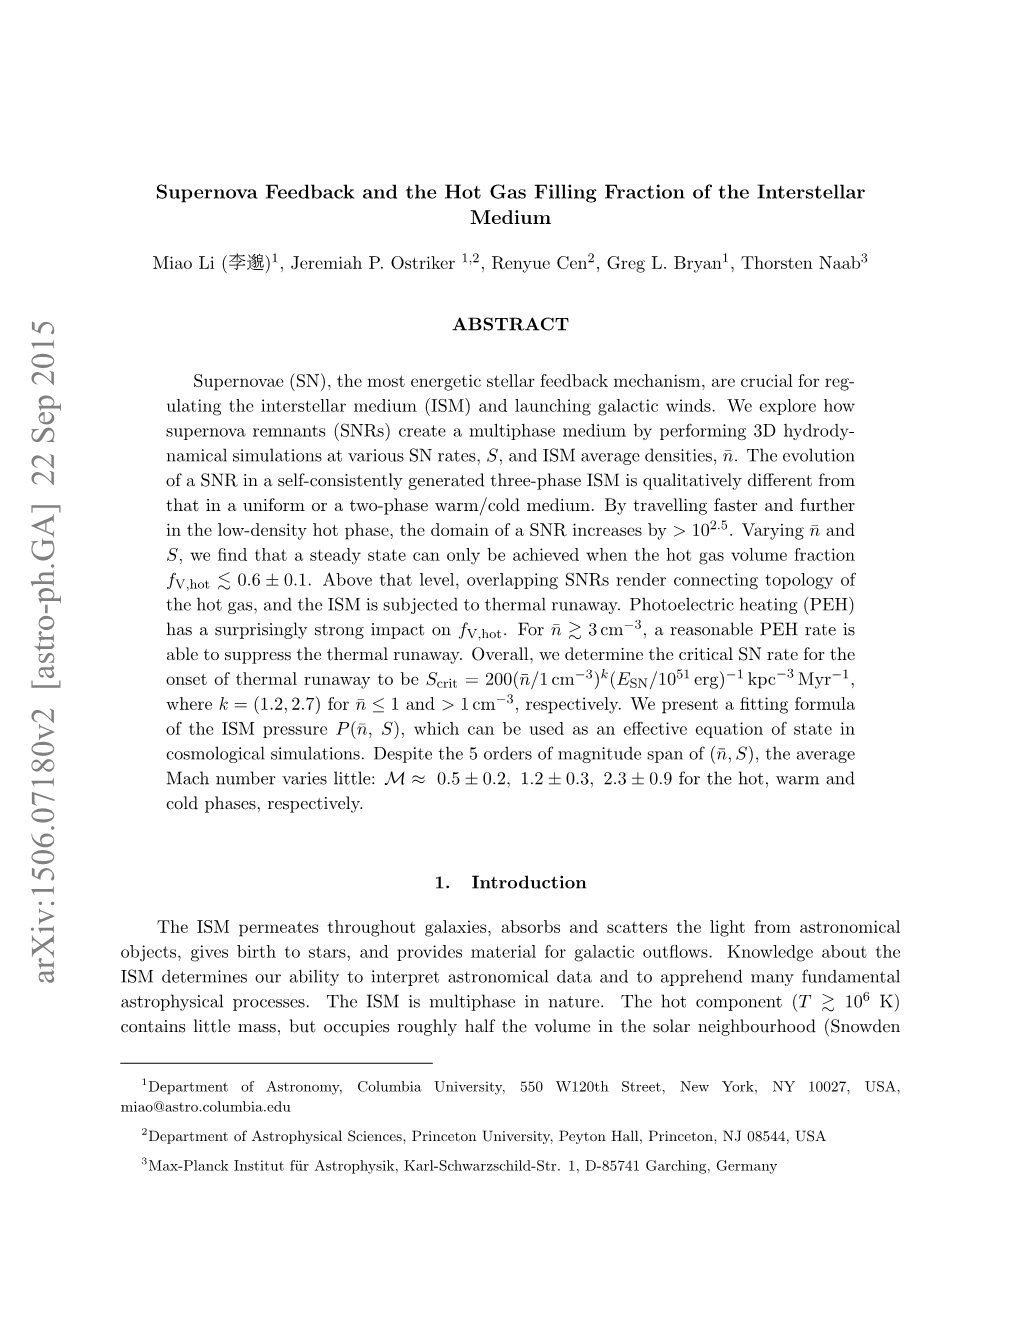 Arxiv:1506.07180V2 [Astro-Ph.GA] 22 Sep 2015 ISM Determines Our Ability to Interpret Astronomical Data and to Apprehend Many Fundamental 6 Astrophysical Processes